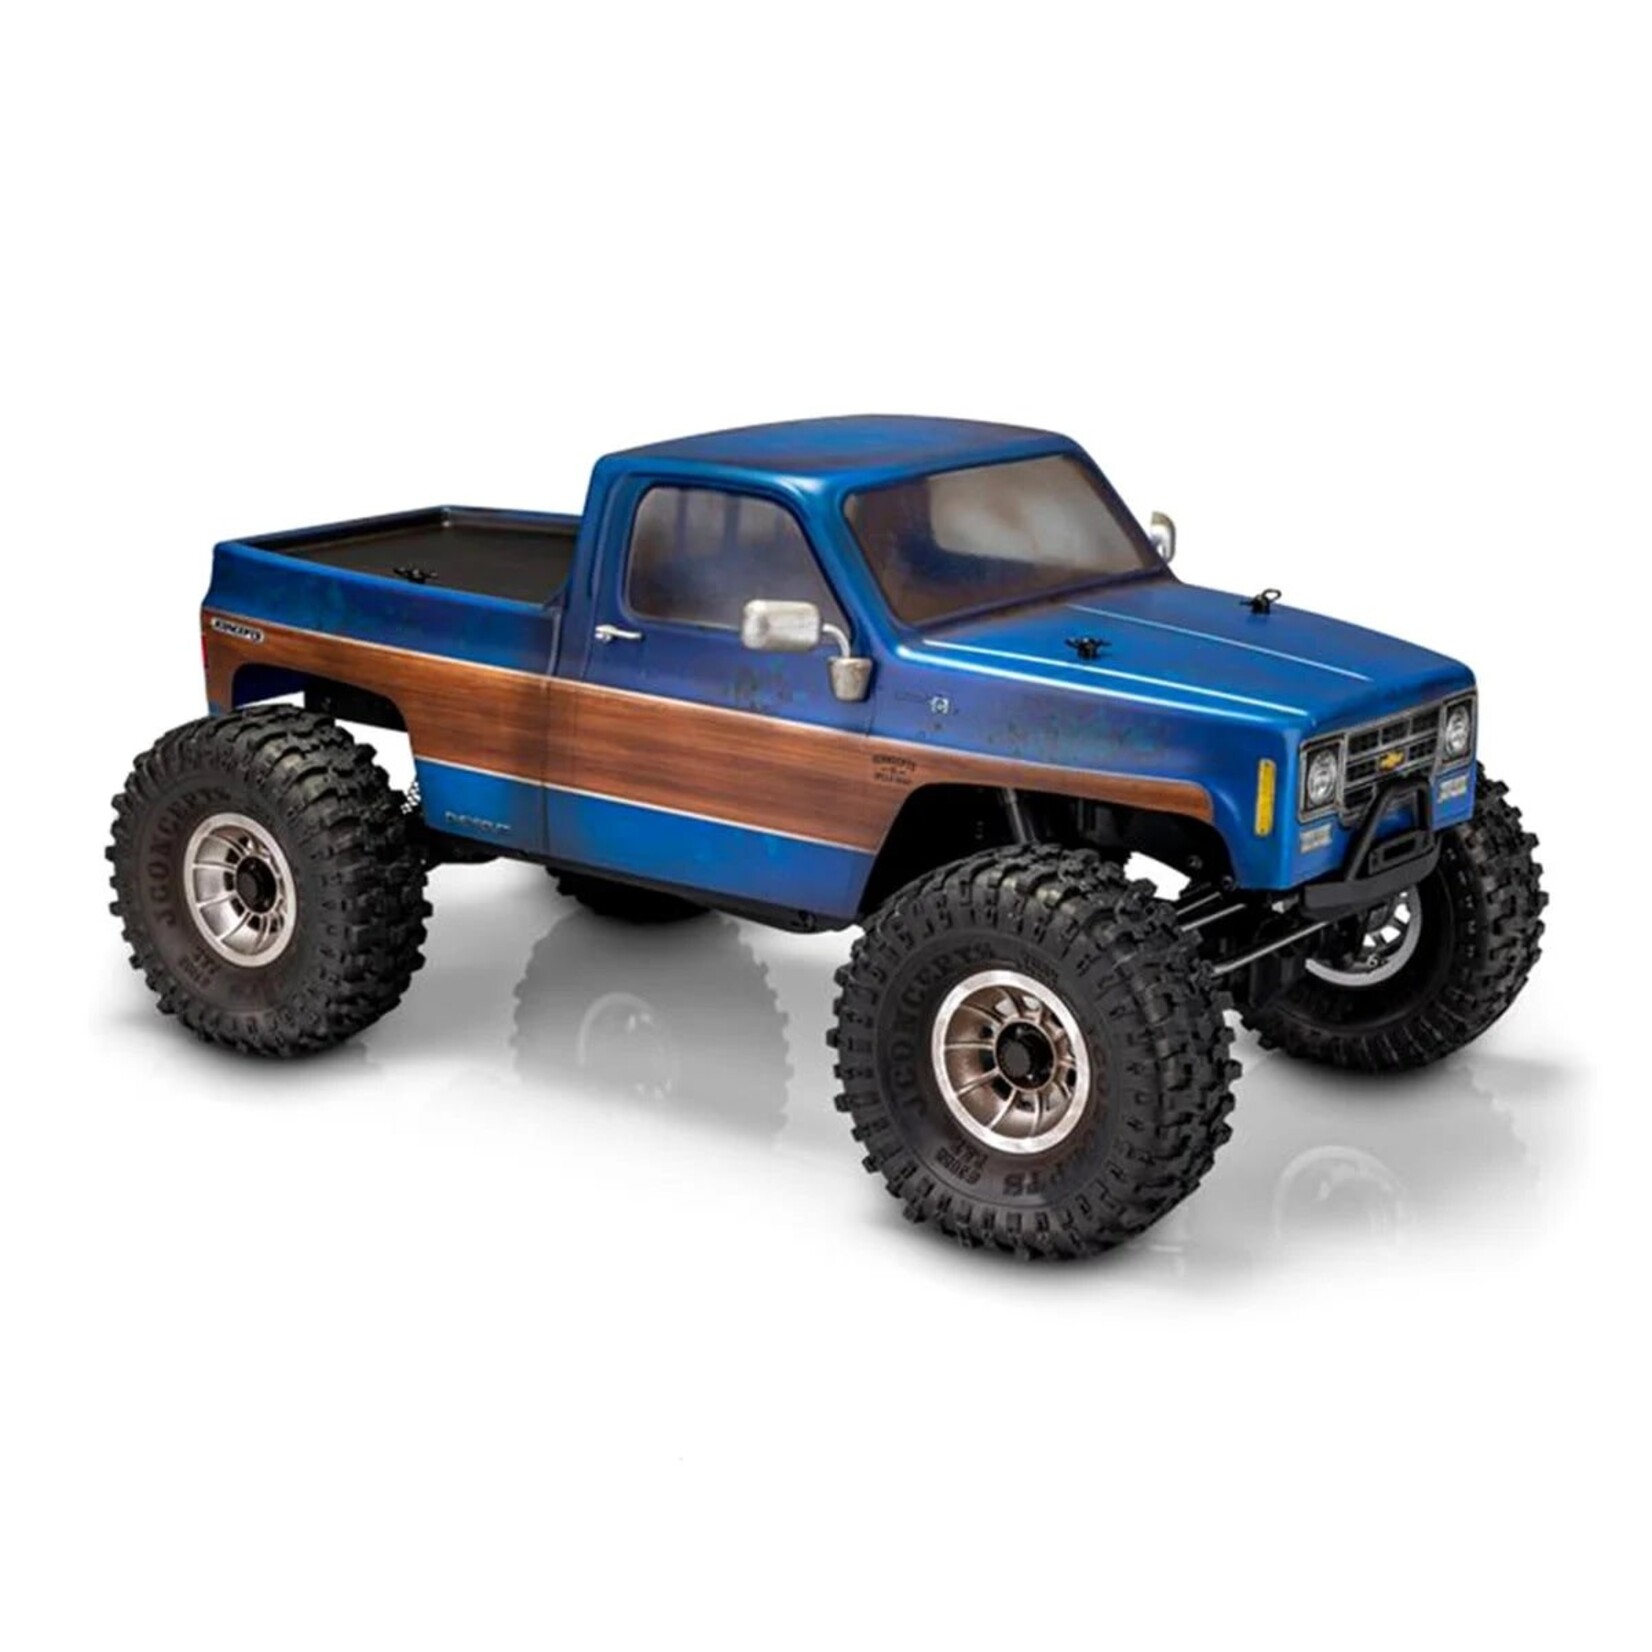 JConcepts JConcepts Tucked 1978 Chevy K10 Rock Crawler "Pre-Trimmed" Body (Clear) (12.3") #0465